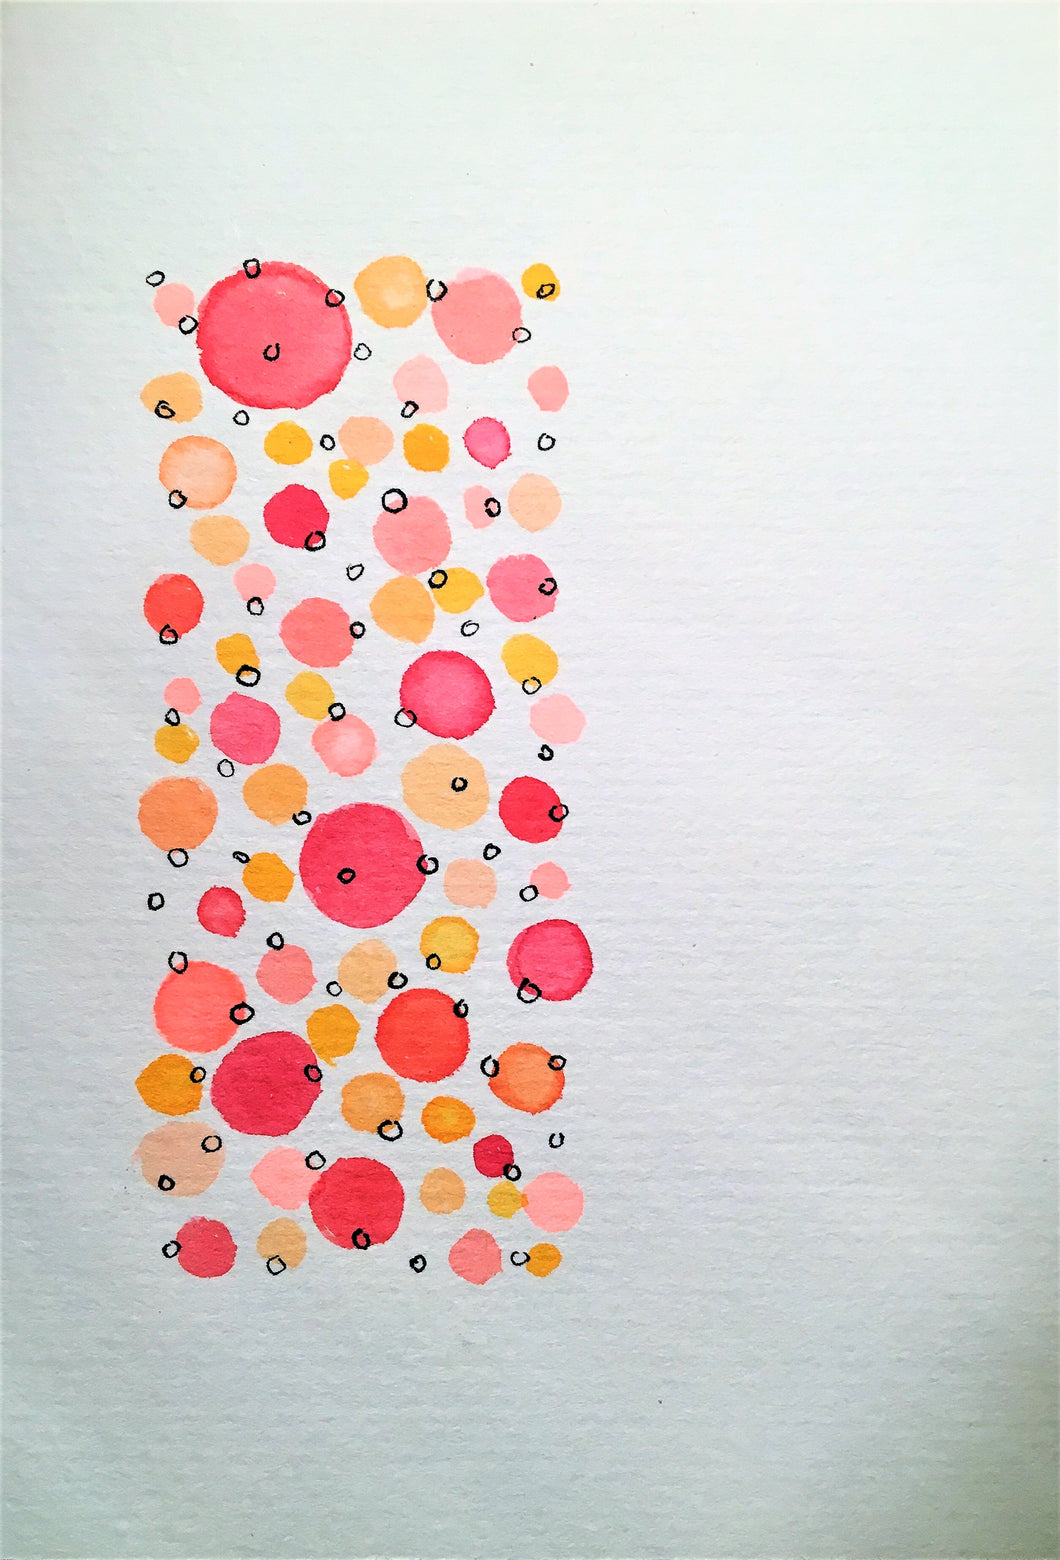 Handpainted Watercolour Greeting Card - Abstract Orange/Red and Ink Circle Design - eDgE dEsiGn London